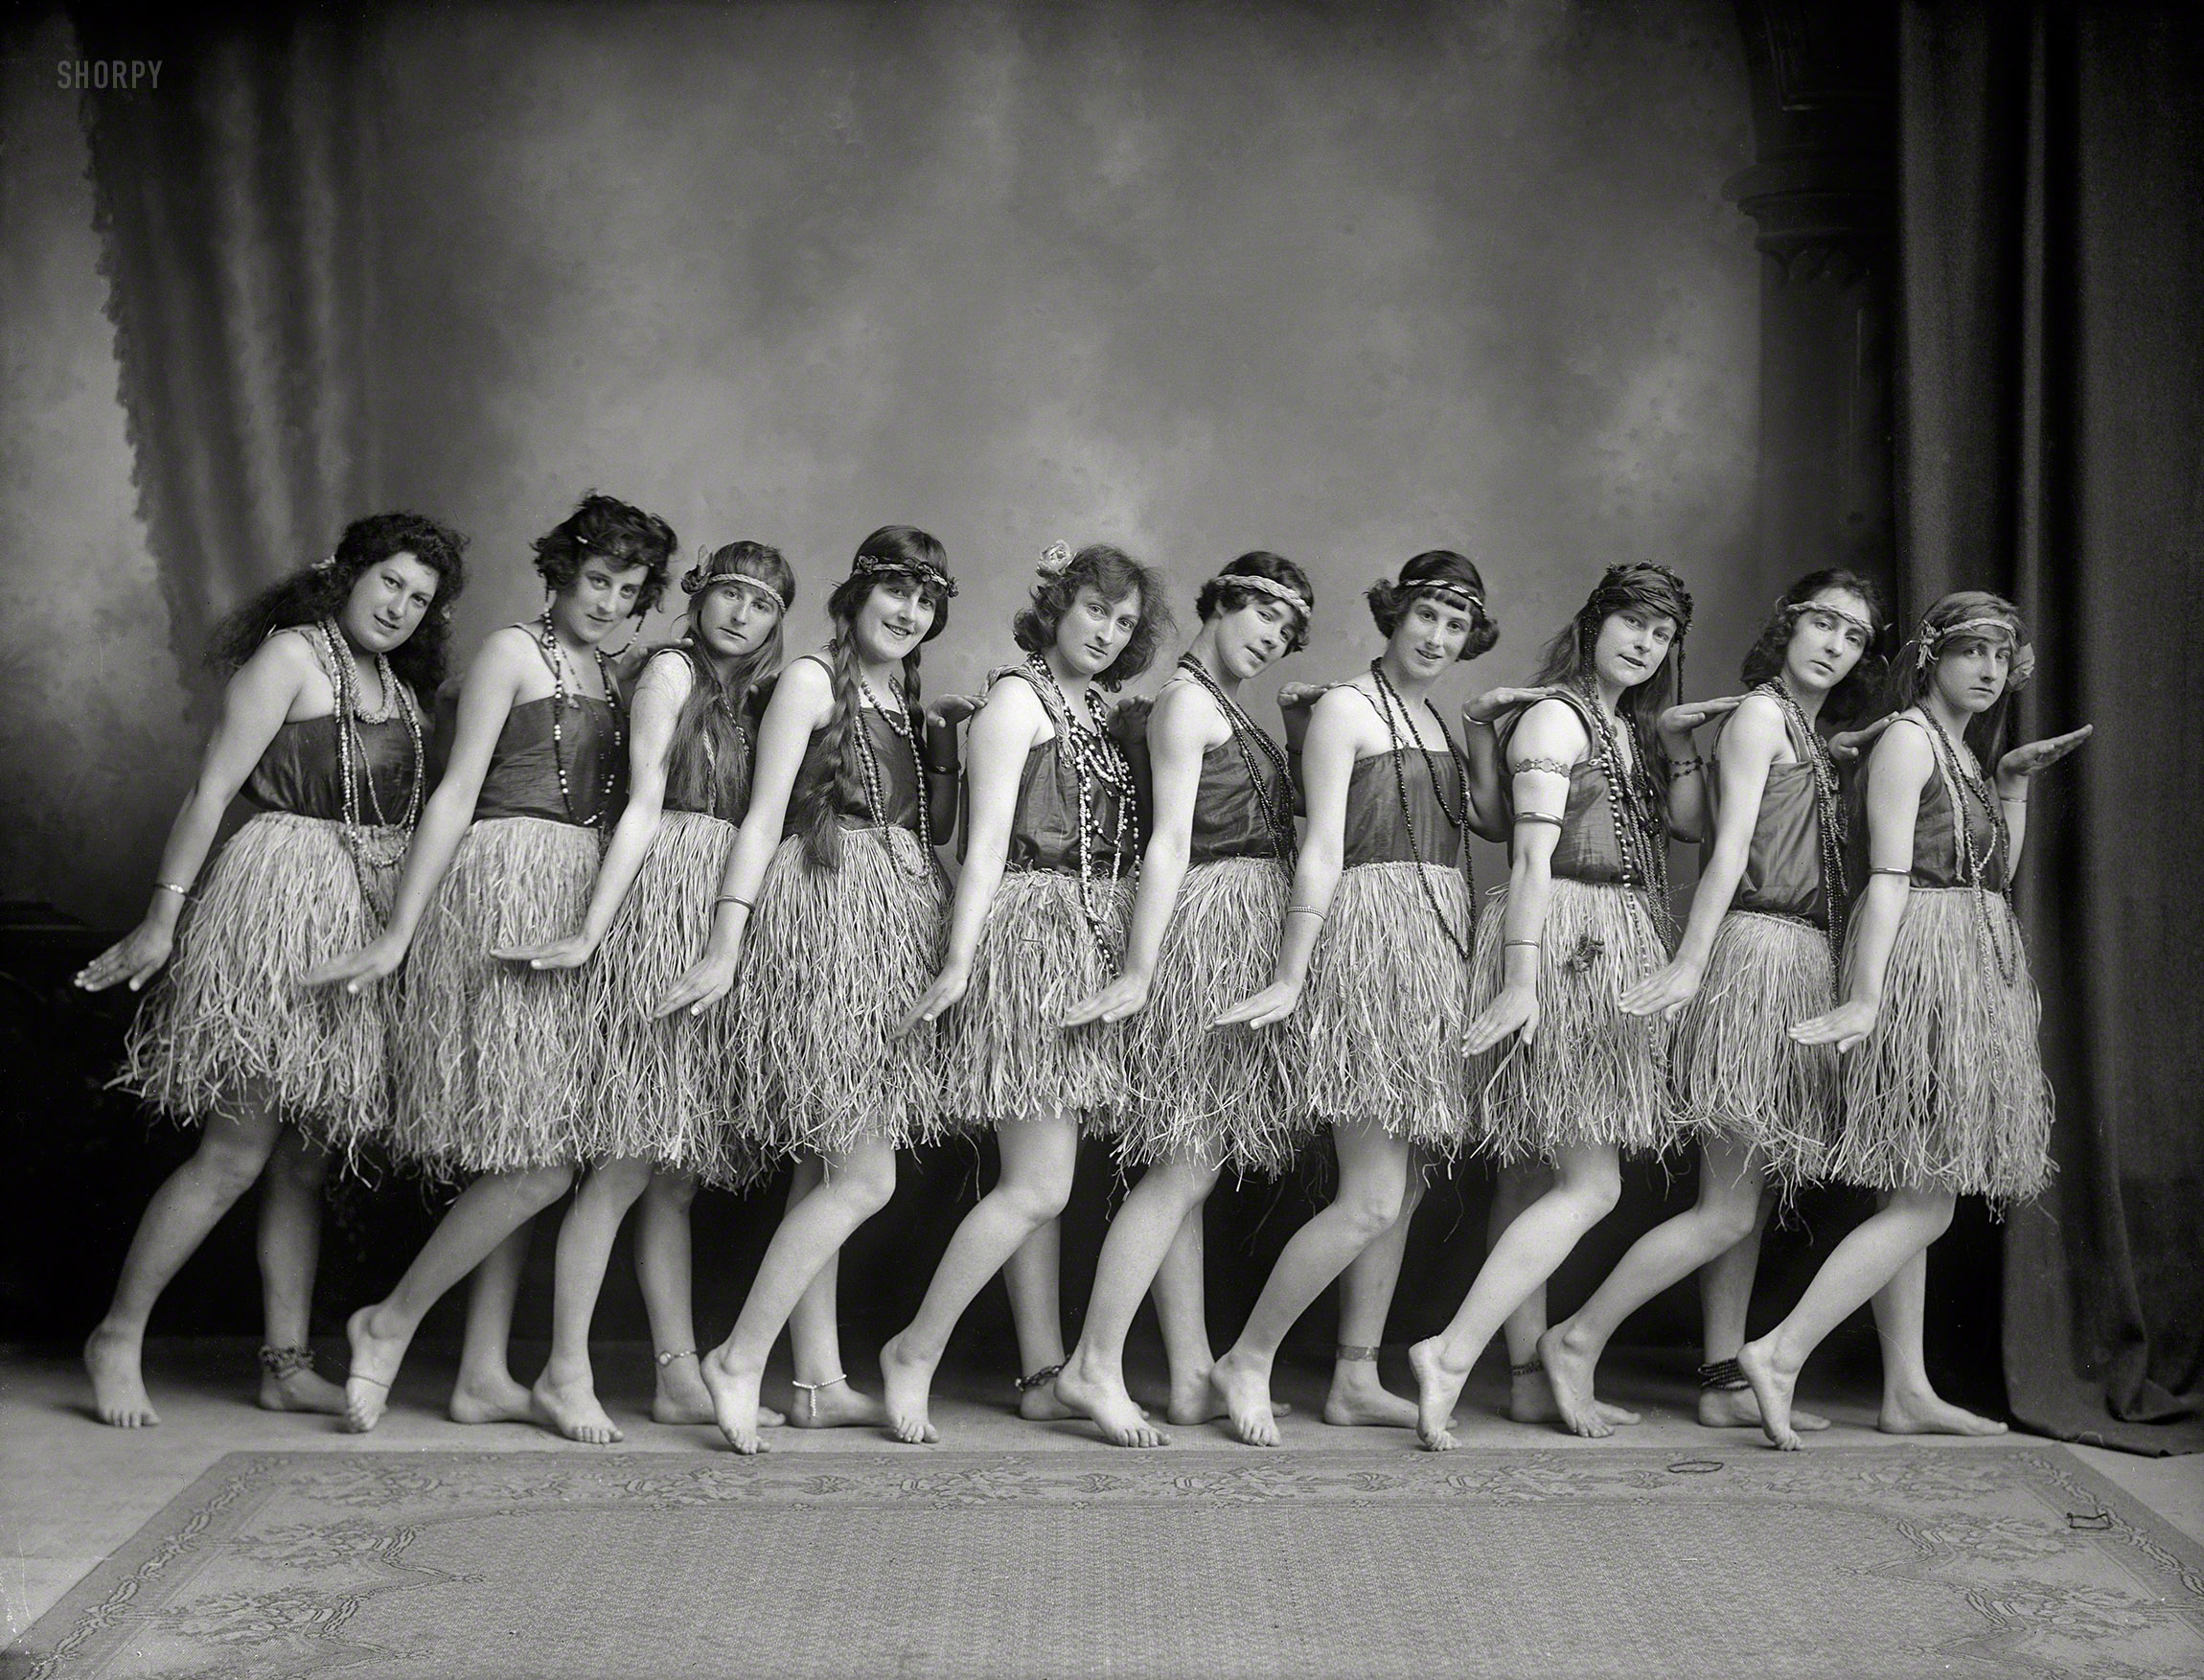 Lasses in grasses circa 1920s. "Nelson District, New Zealand. Row of young women (music hall dancers?) in costume, standing barefoot in dance pose, wearing headbands, long strings of beads, Hawaiian hula style grass skirts and anklets." Glass negative by Frederick Nelson Jones. View full size.